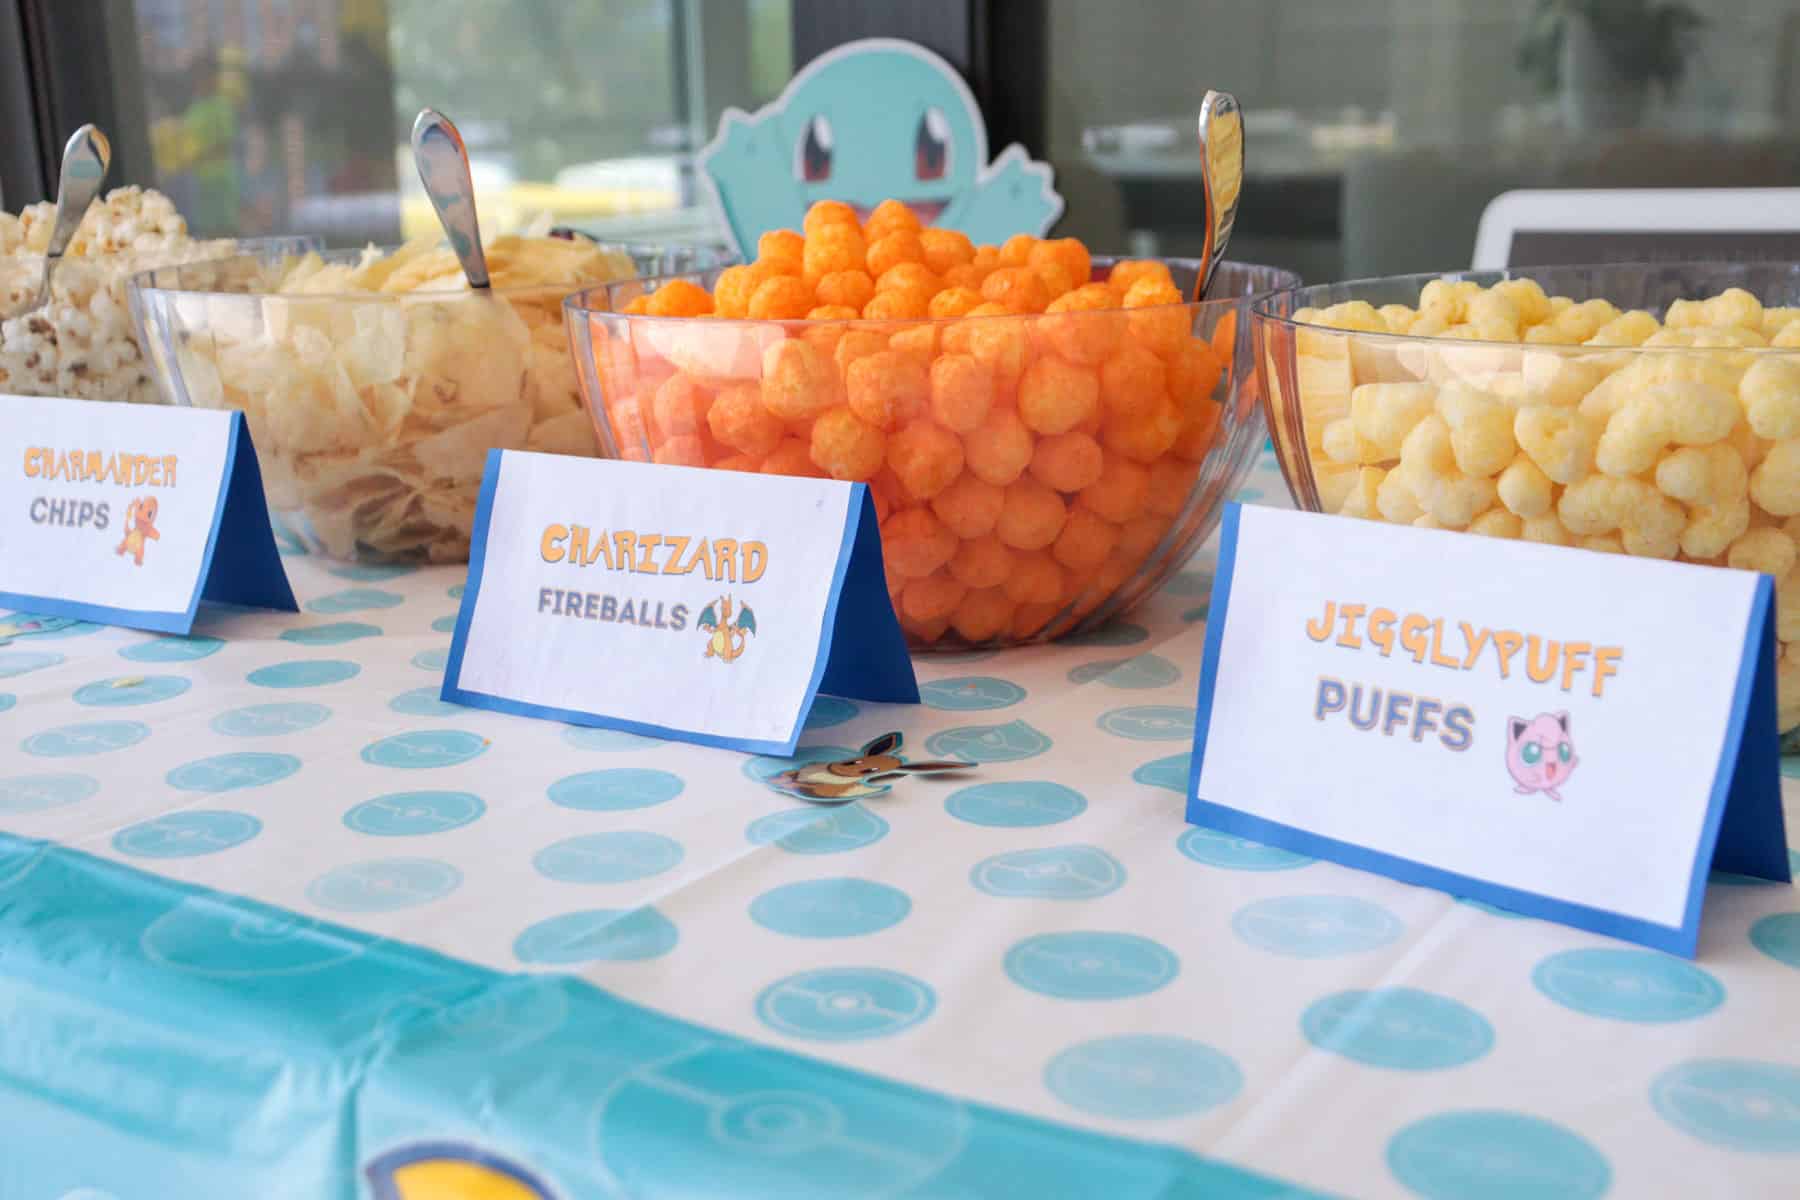 Snack table with food cards and bowls with snacks for party.